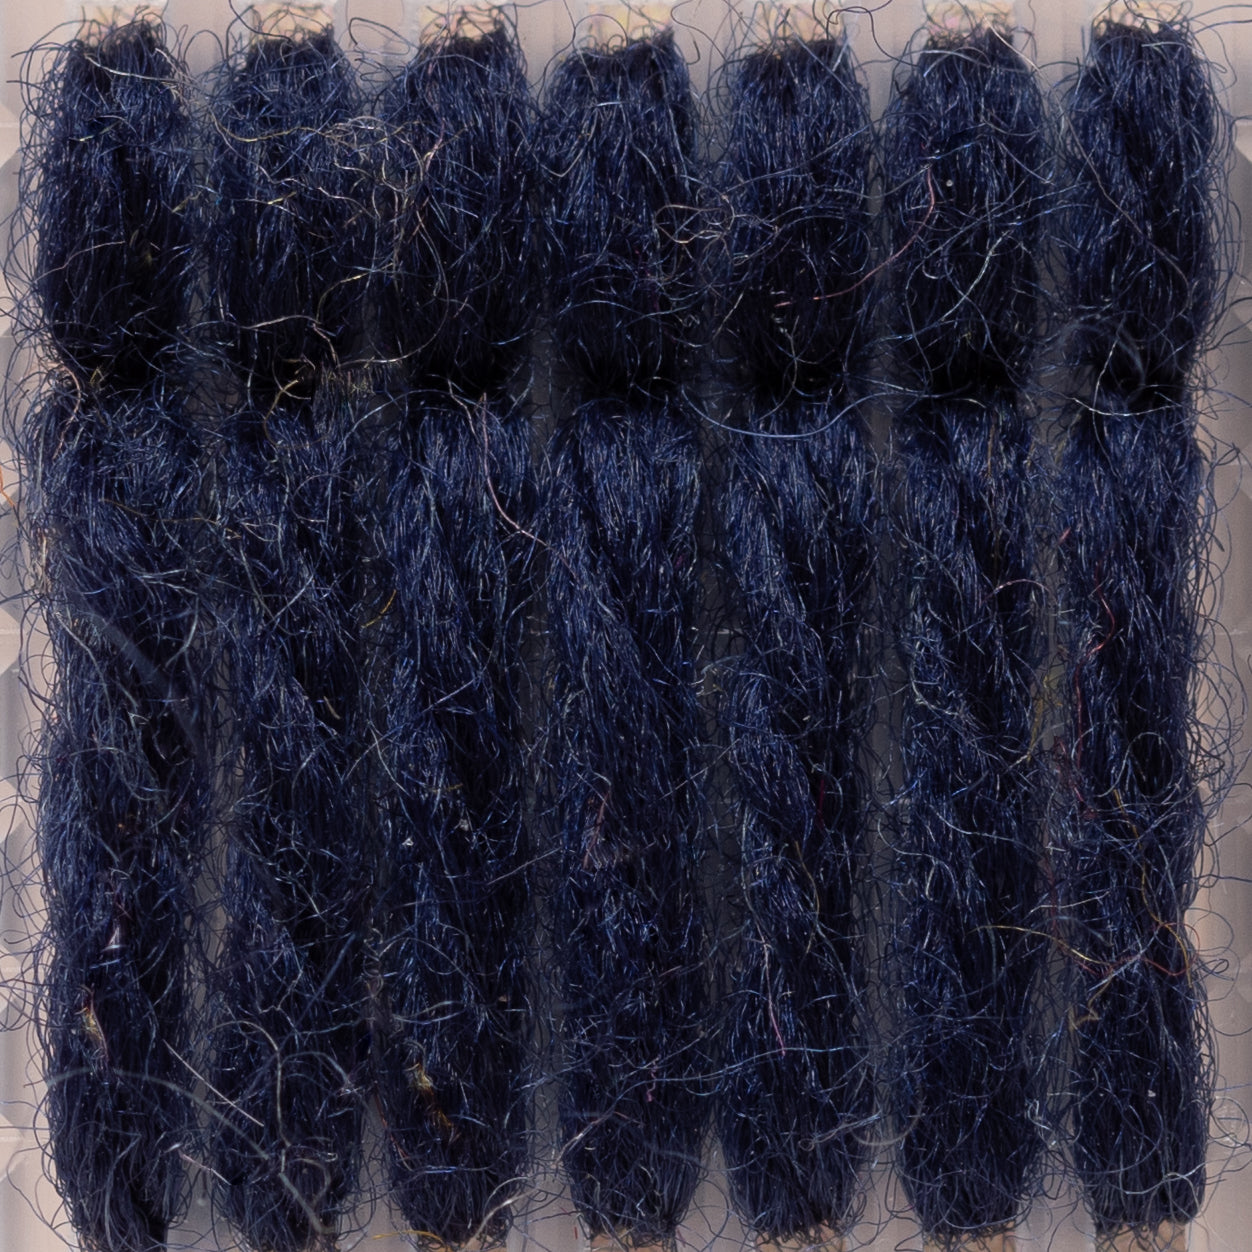 Anchor Tapestry wool